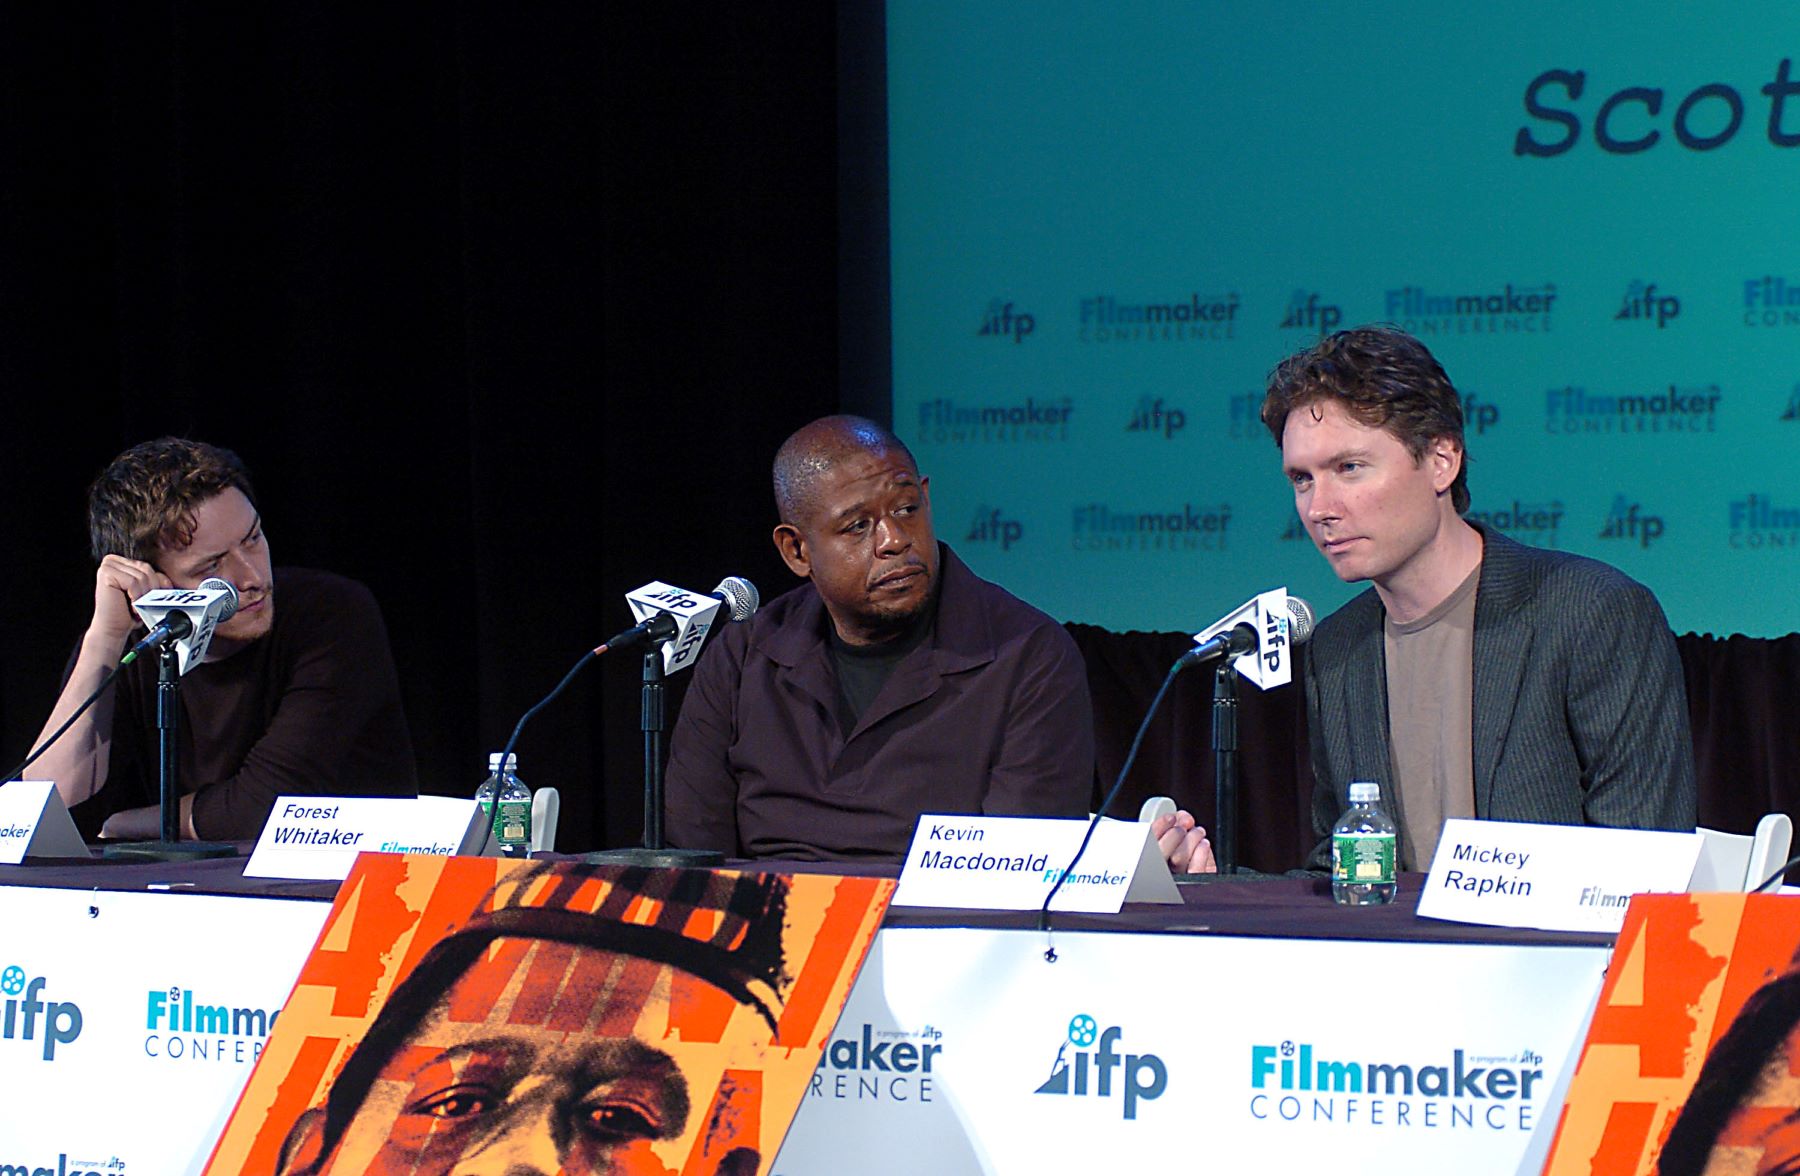 Forest Whitaker at a 'The Last King of Scotland' panel with James McAvoy and director Kevin McDonald